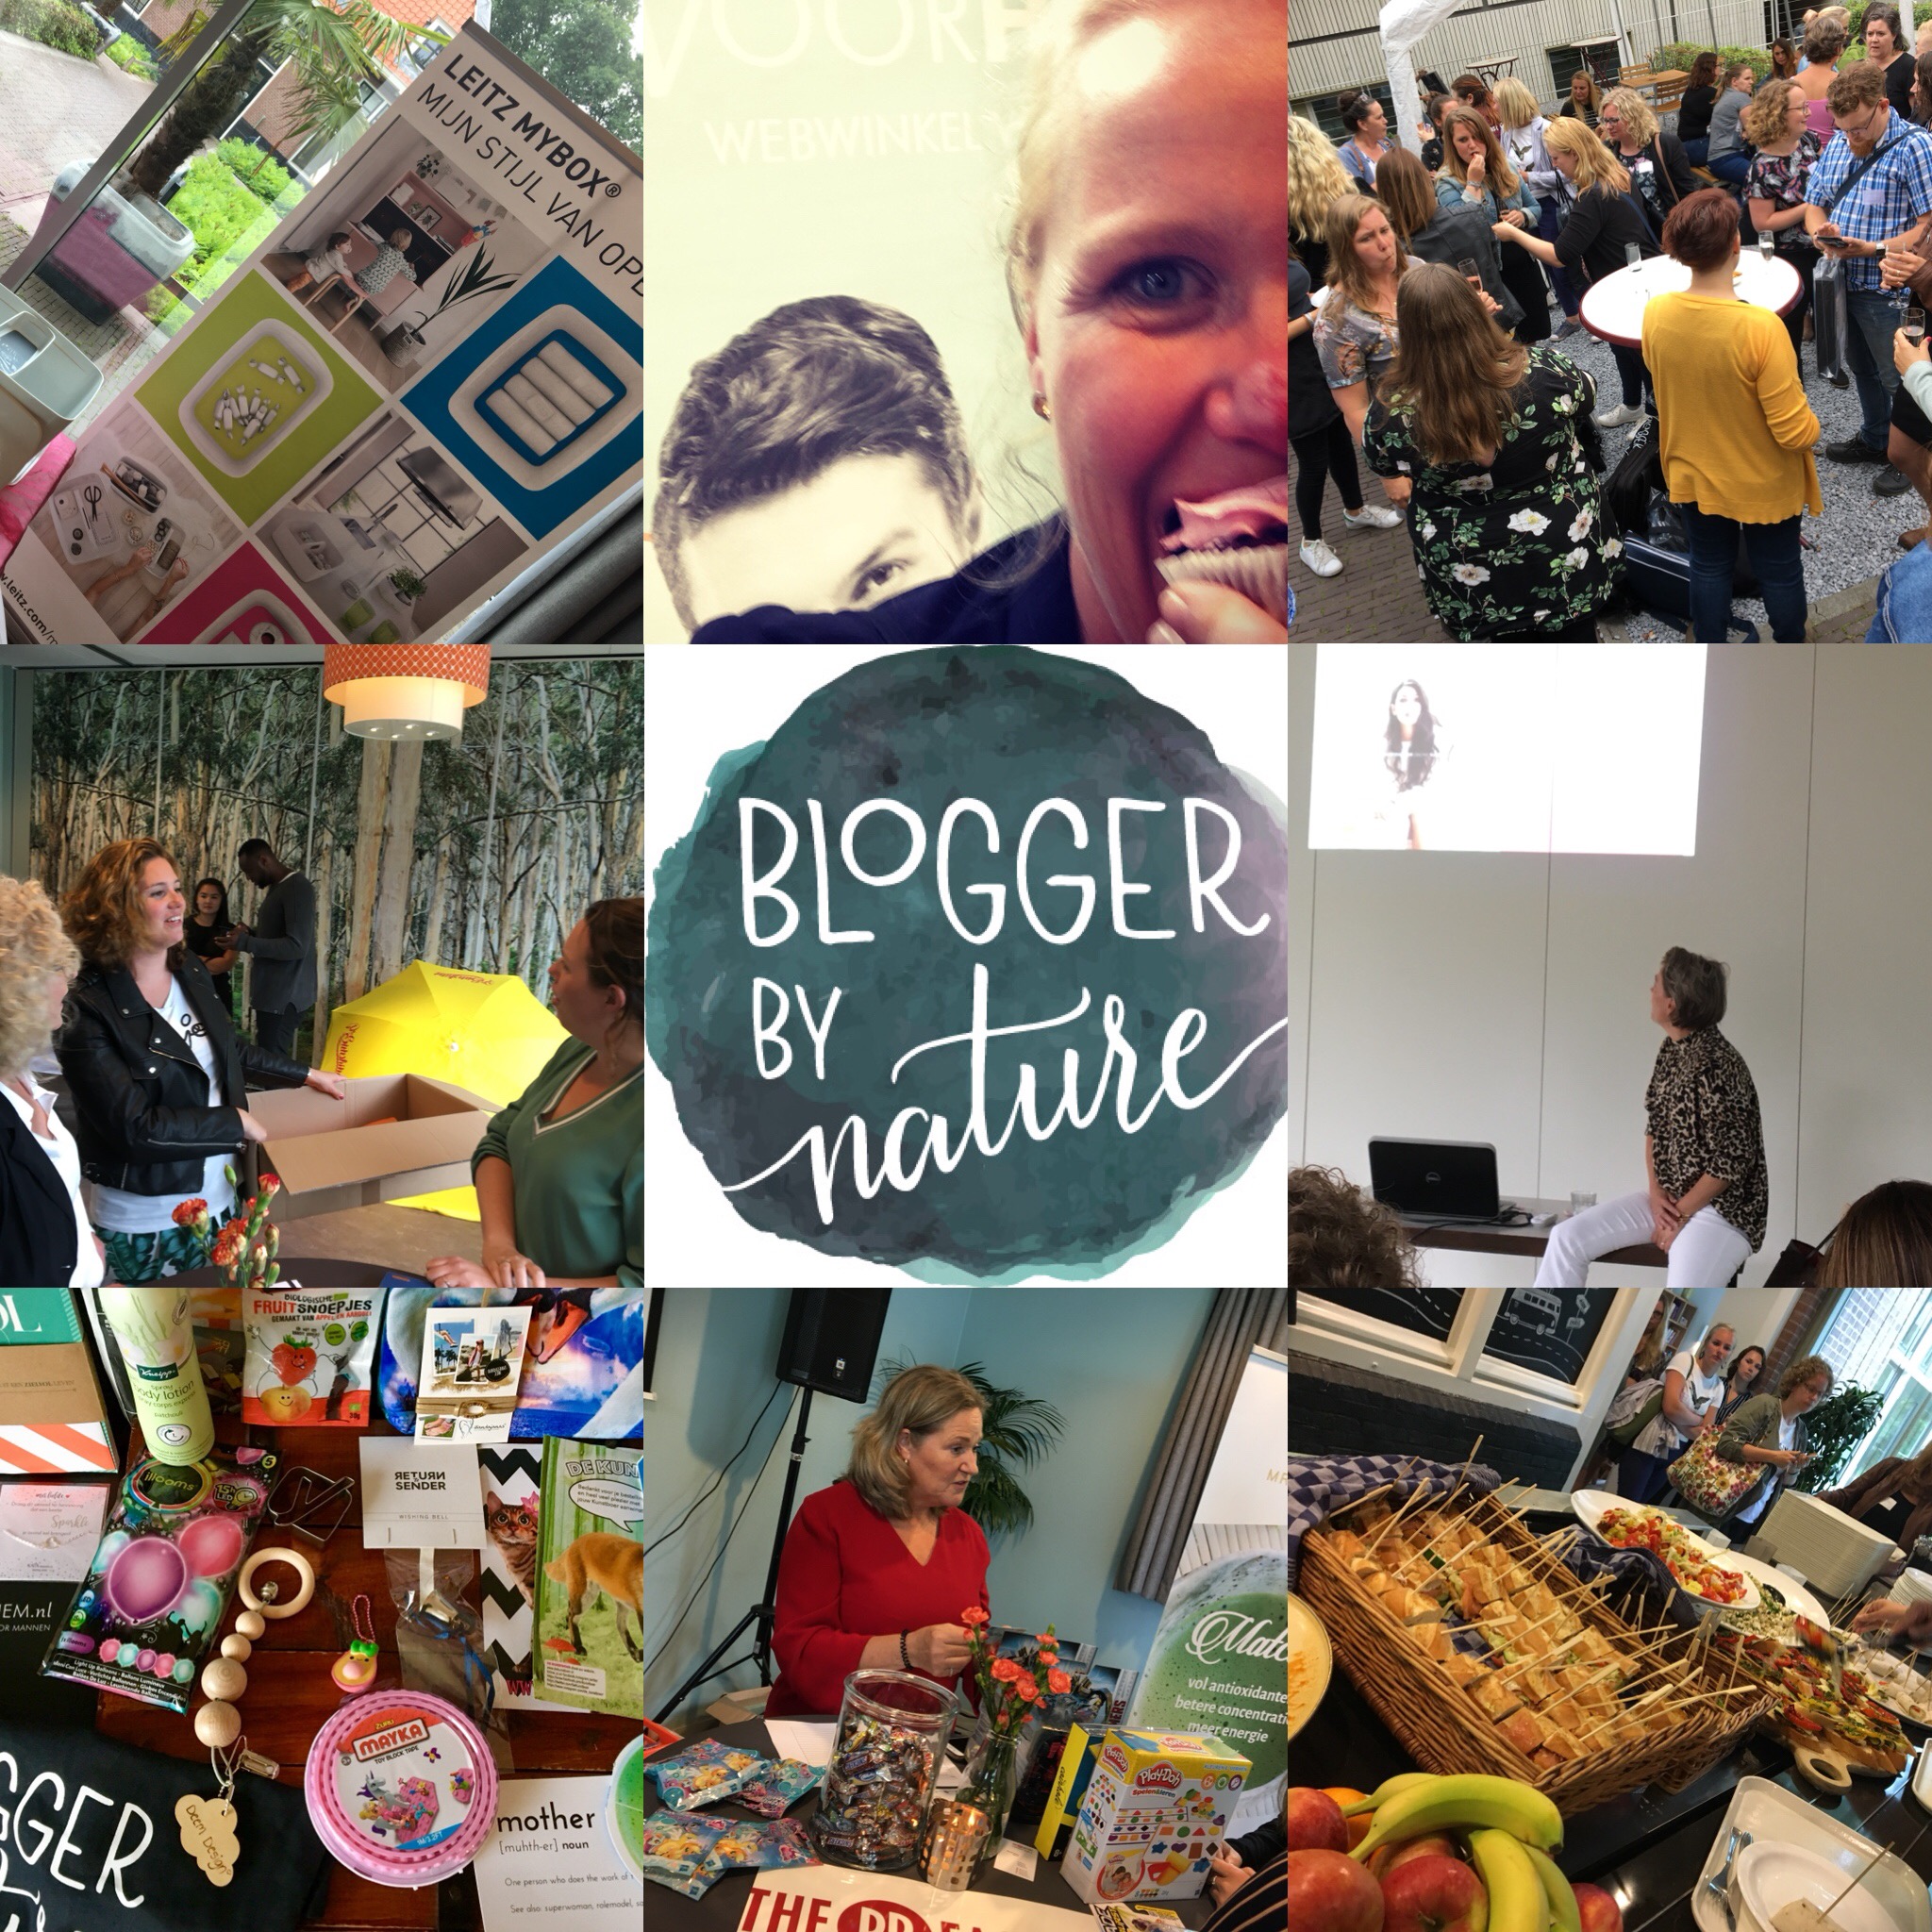 Blogger by nature BV Familie